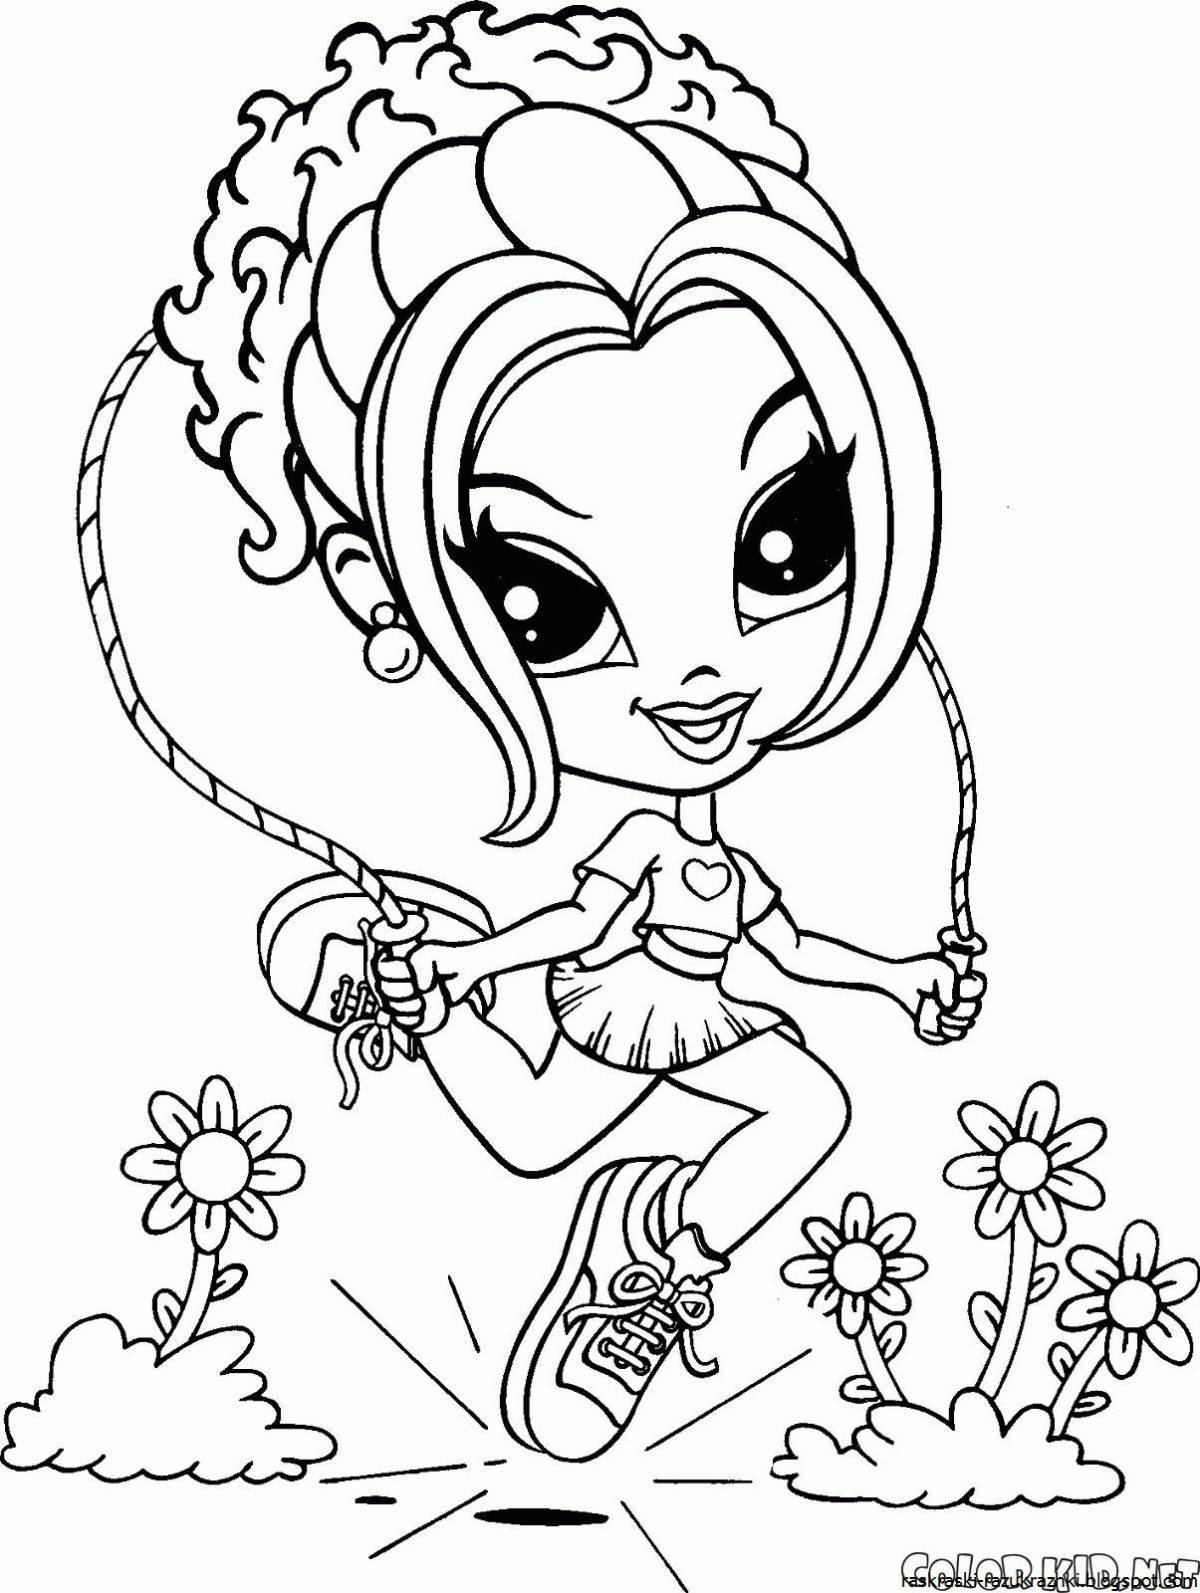 Attractive coloring page turn it on